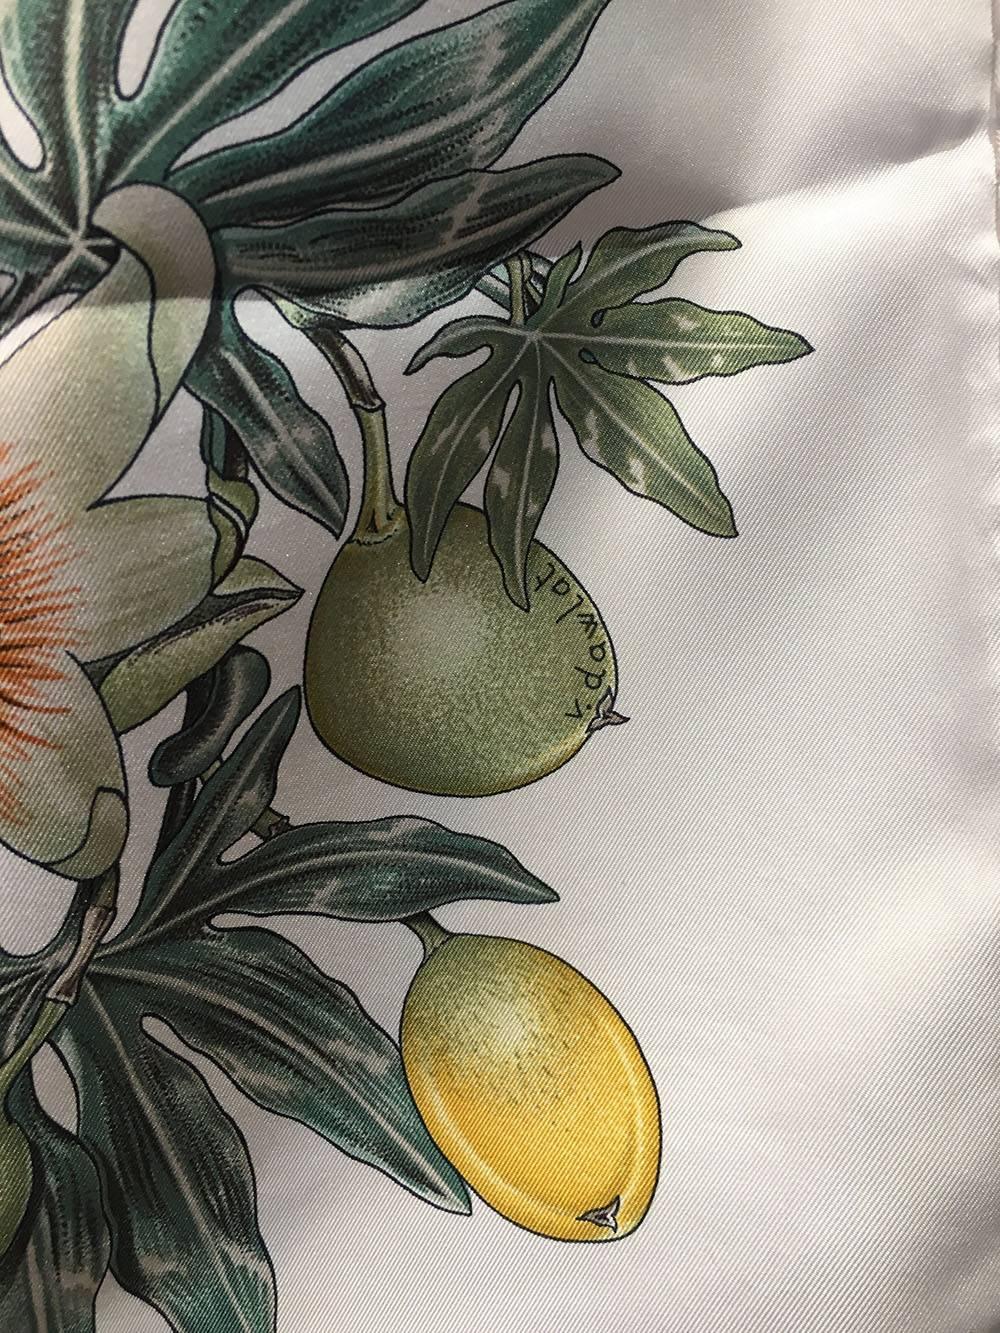 GORGEOUS Hermes Passiflores Silk Scarf c1996 in Cream in excellent condition.  Original silk screen design c1996 by Valerie Dawlat-Dumoulin features a centered star design in tan surrounded by green foliage with lemon and lime fruits, a basket with